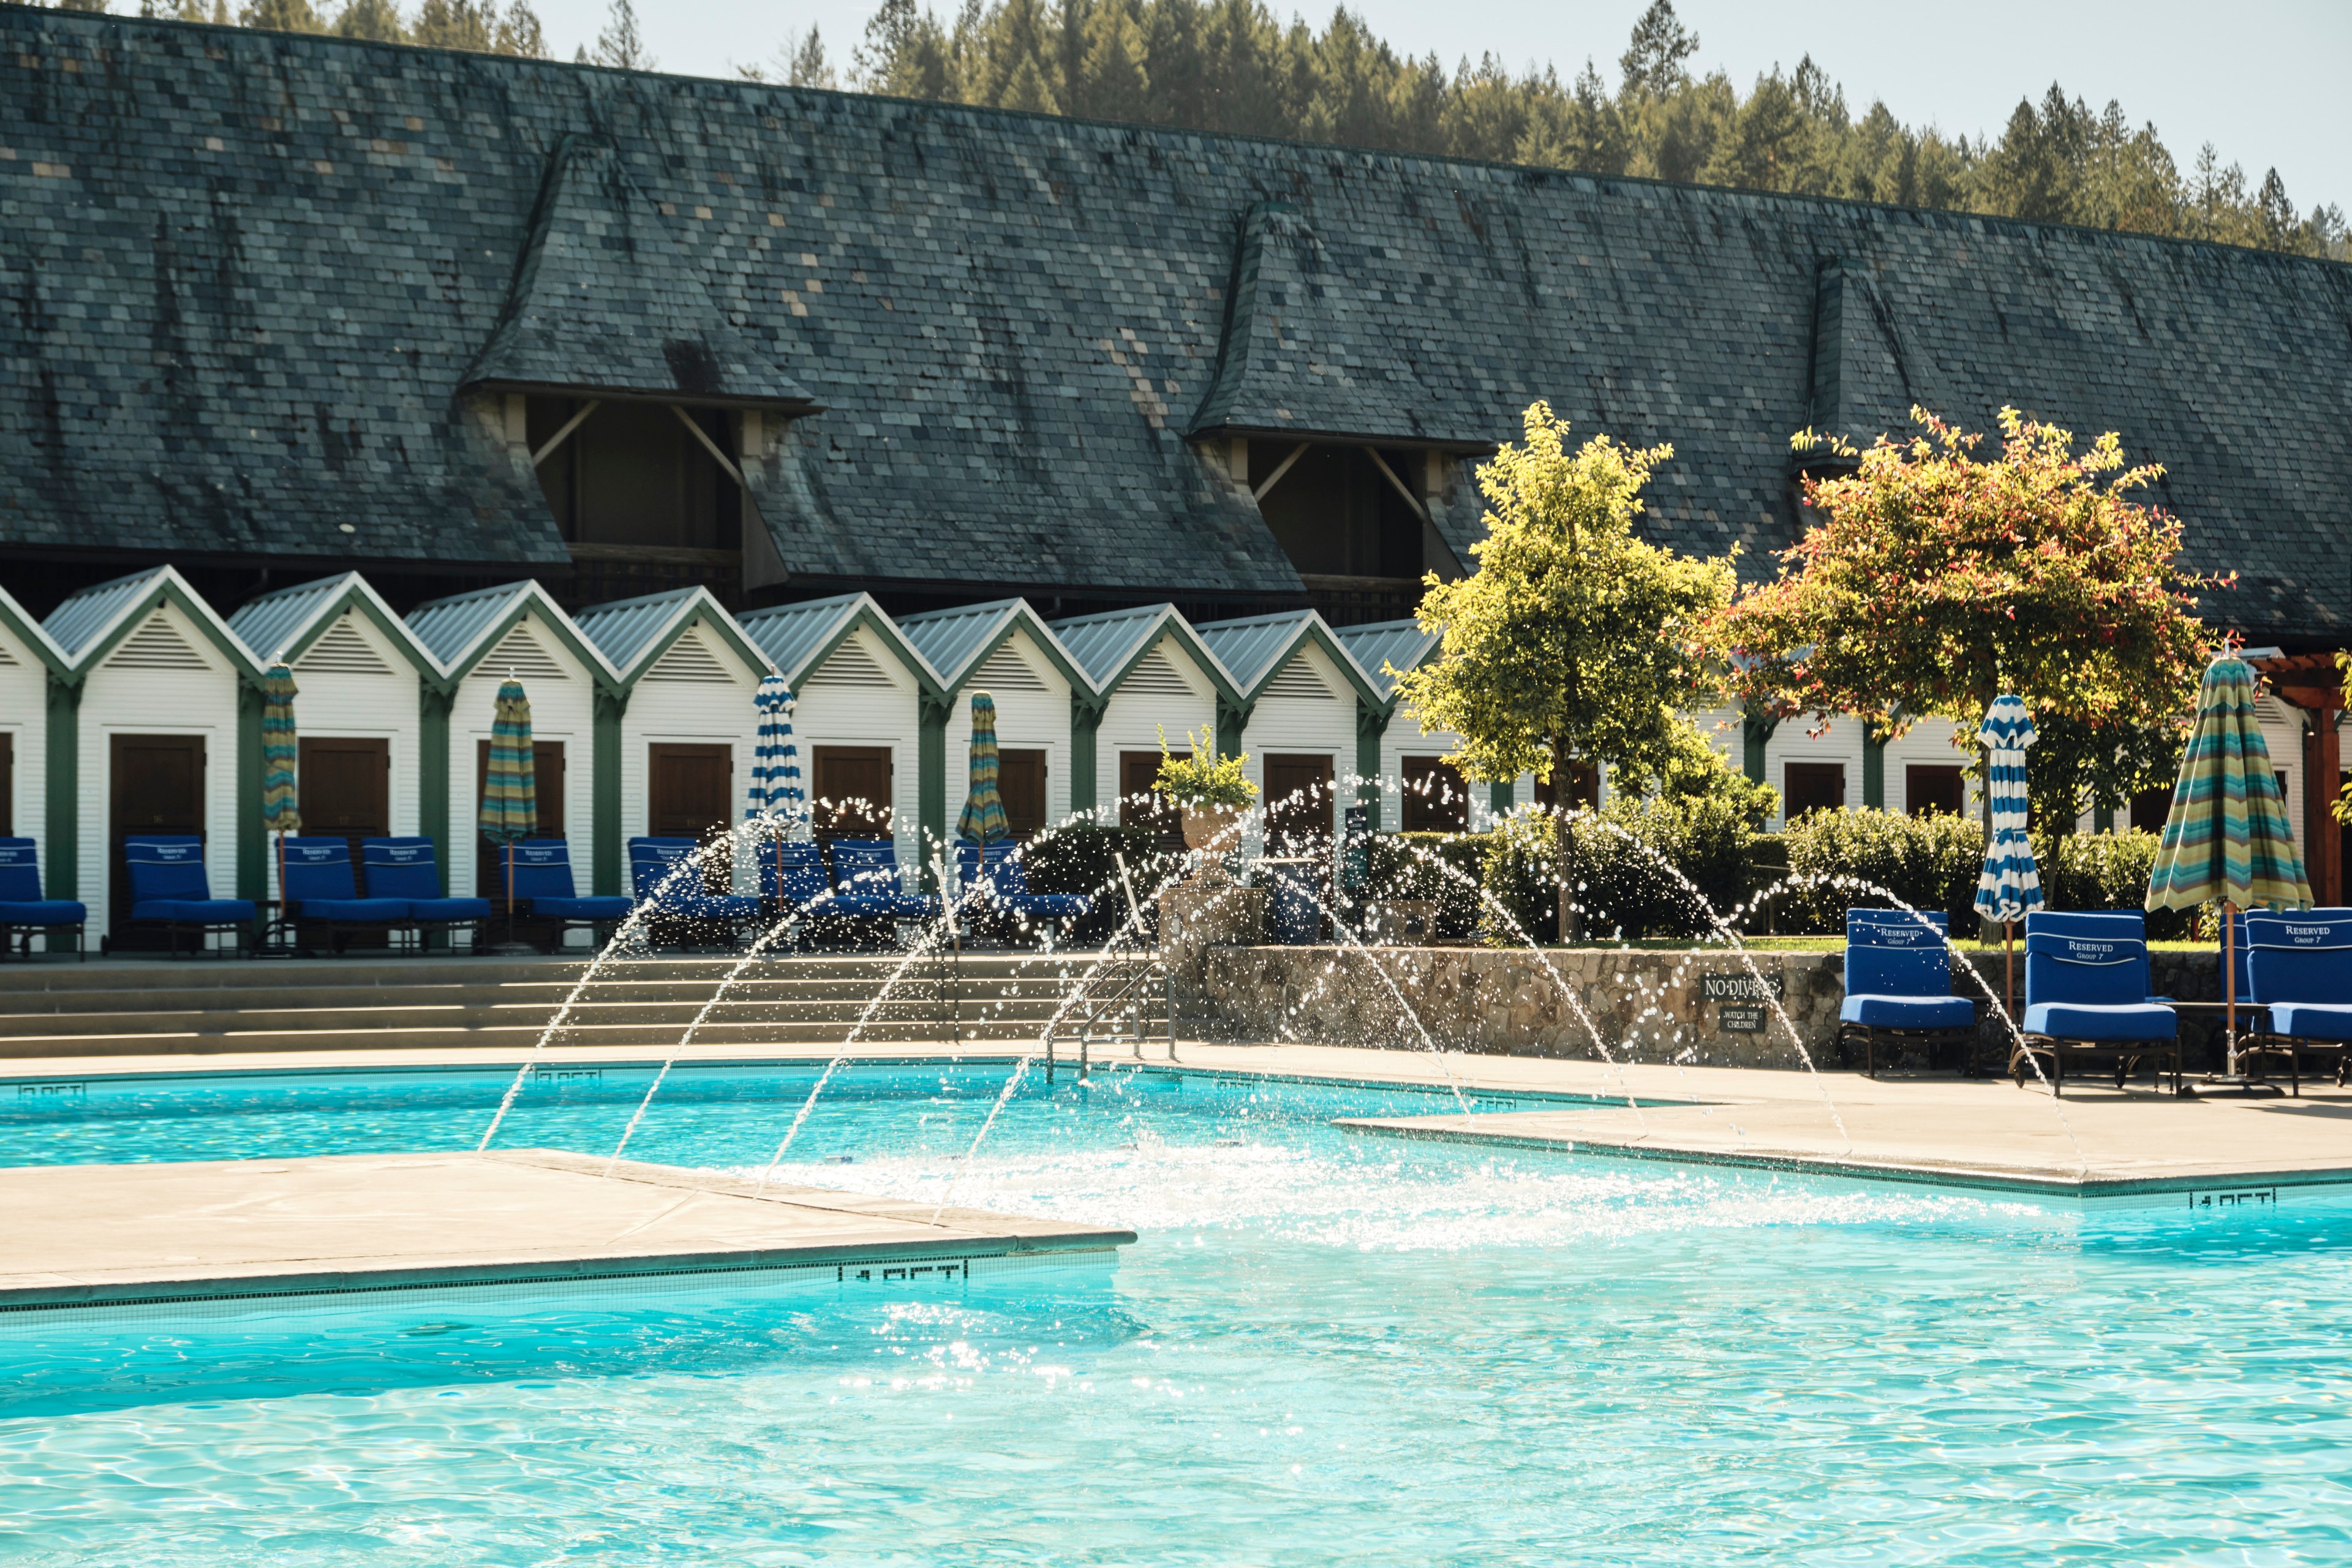 The image depicts a serene outdoor pool with fountains, surrounded by blue lounge chairs, parasols, and white beach-style cabins backed by a building with a shingled roof.